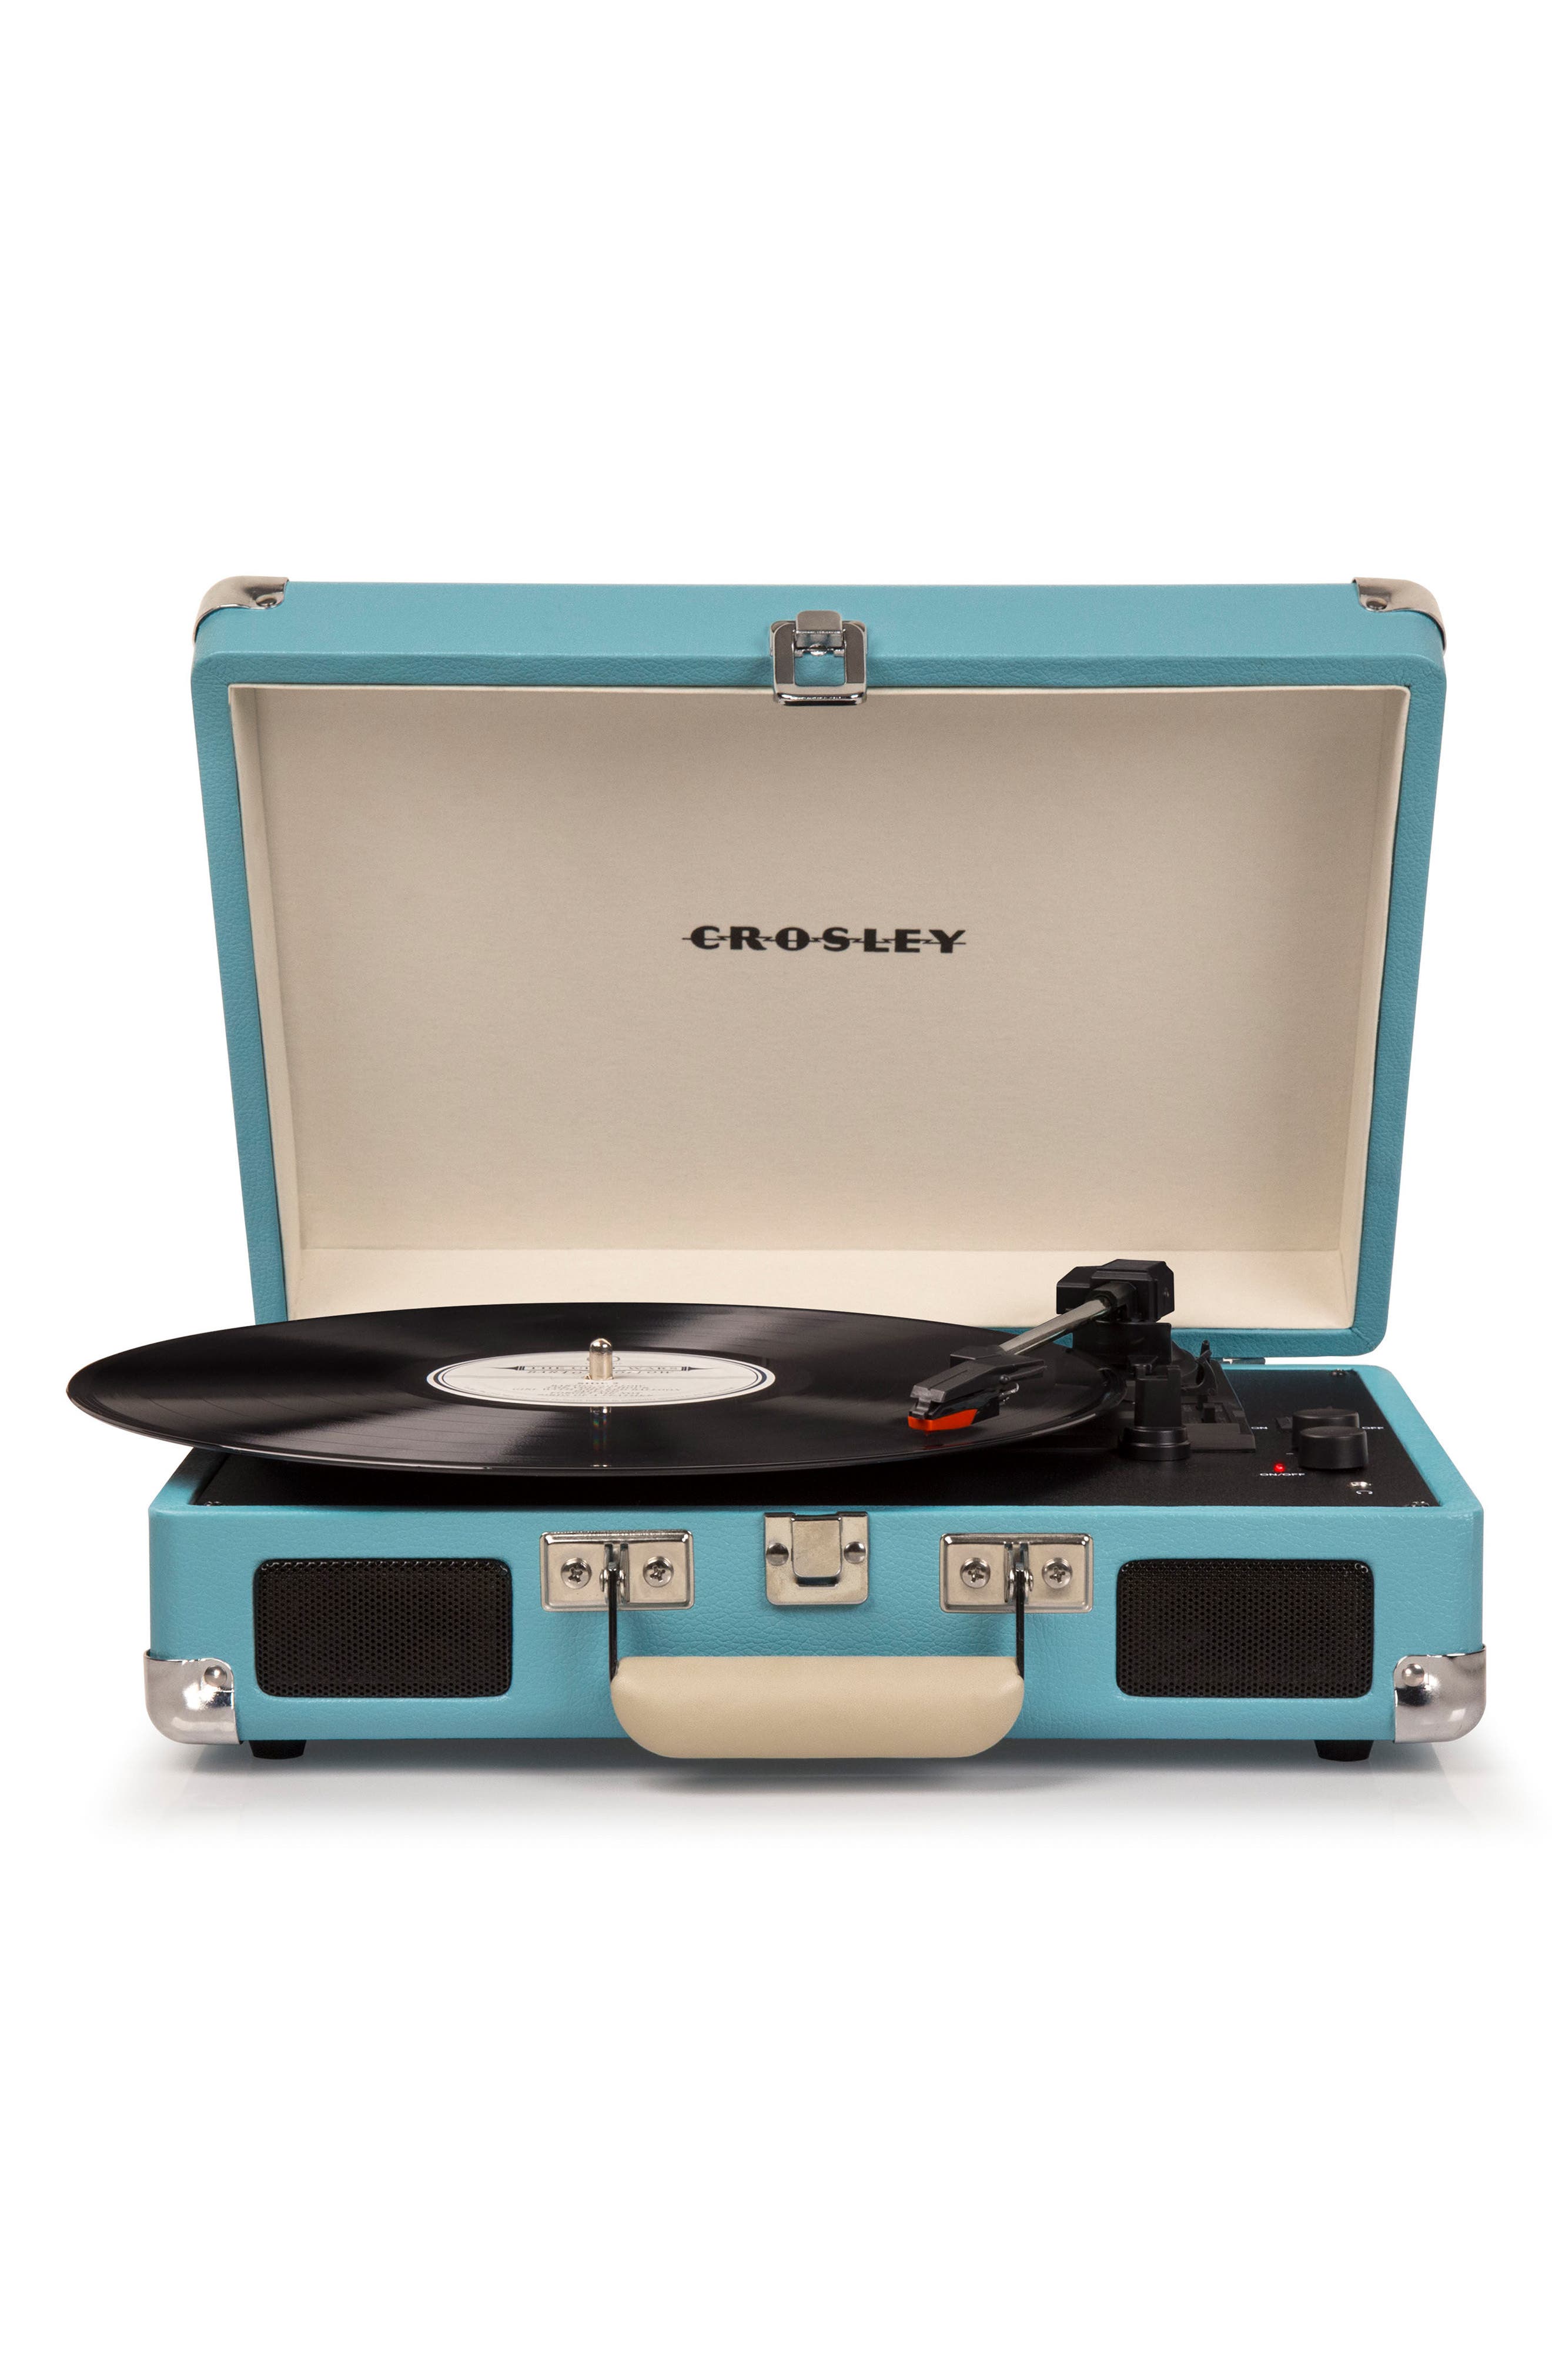 UPC 710244209366 product image for Crosley Radio Cruiser Deluxe Turntable, Size One Size - Blue/green | upcitemdb.com